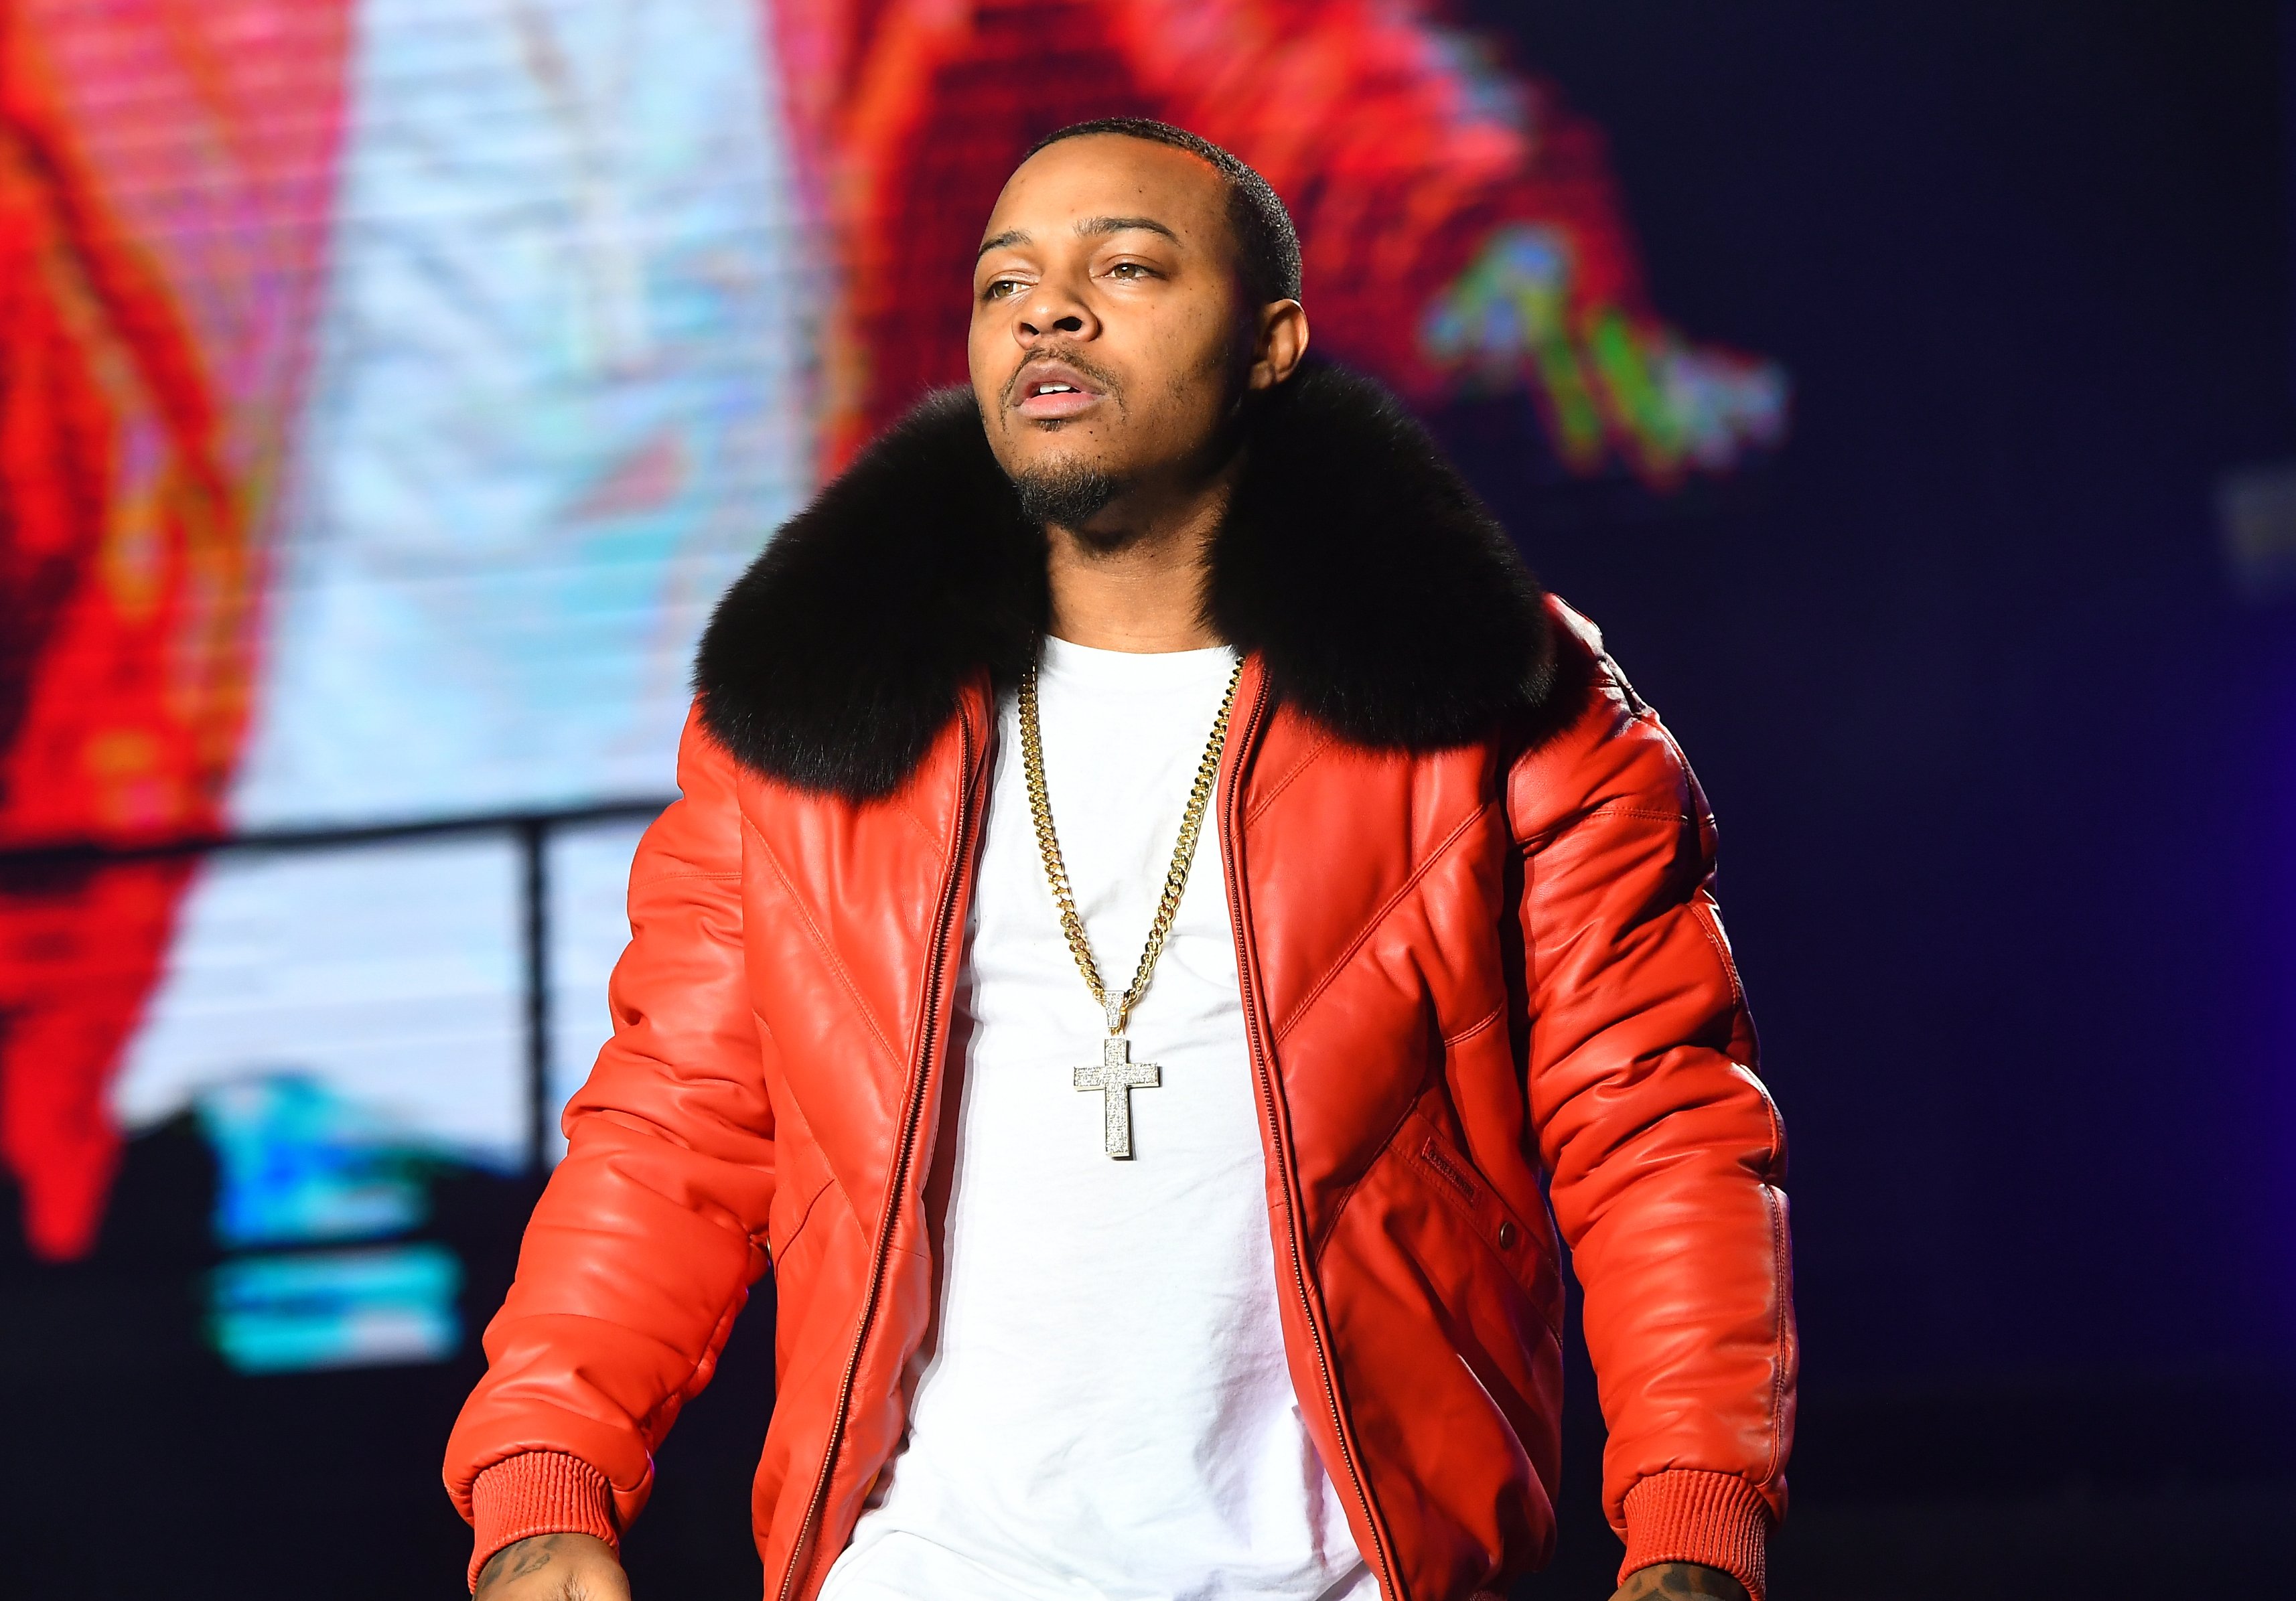 Bow Wow performs onstage during the B2K's Millennium Tour on April 5, 2019 in Atlanta, Georgia. | Photo: Getty Images